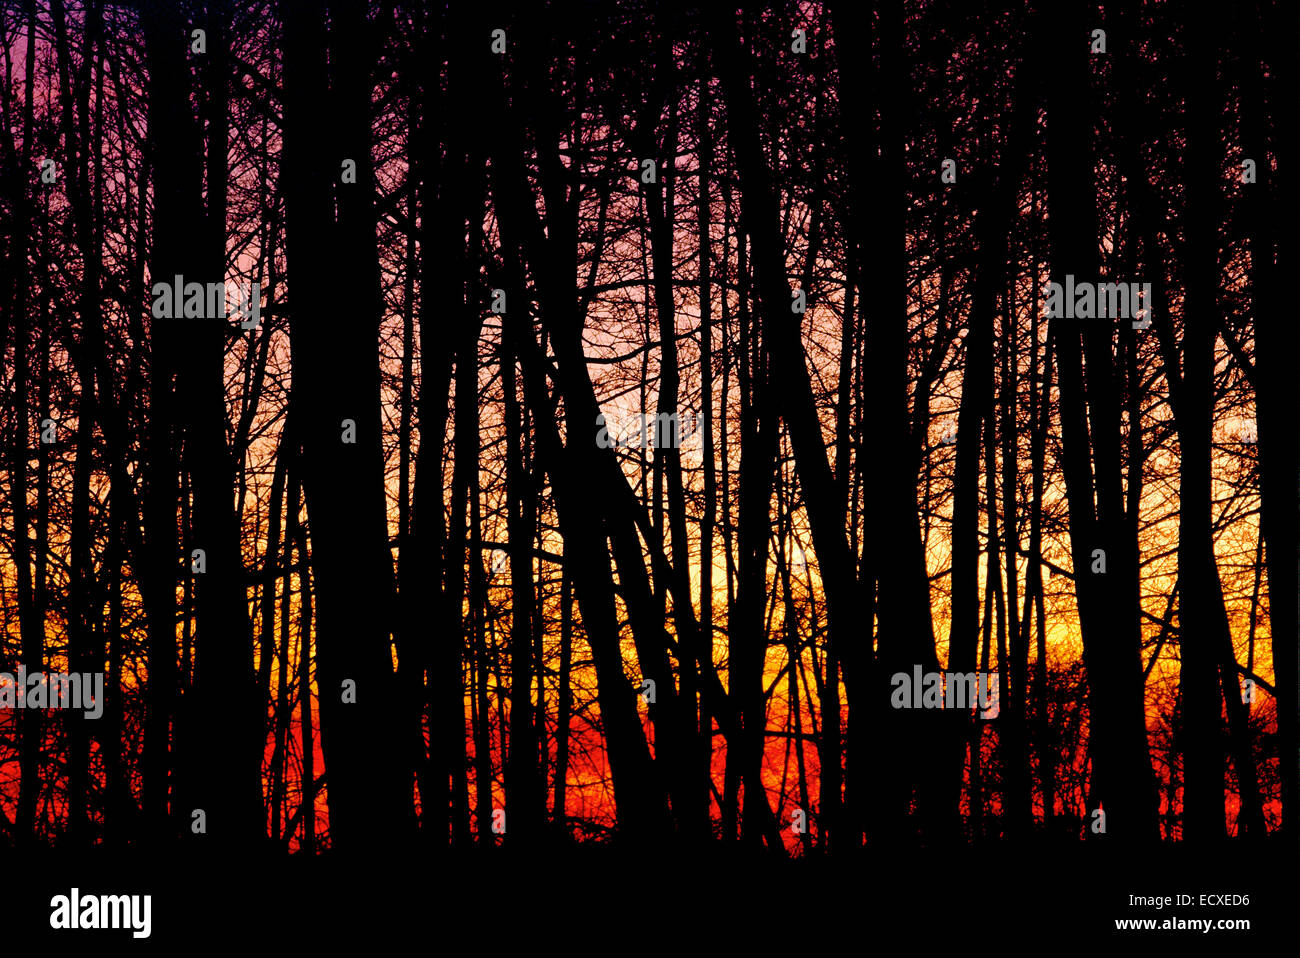 Wood of black alder trees (Alnus glutinosa) at sunset - Silhouettes in Backlight Stock Photo